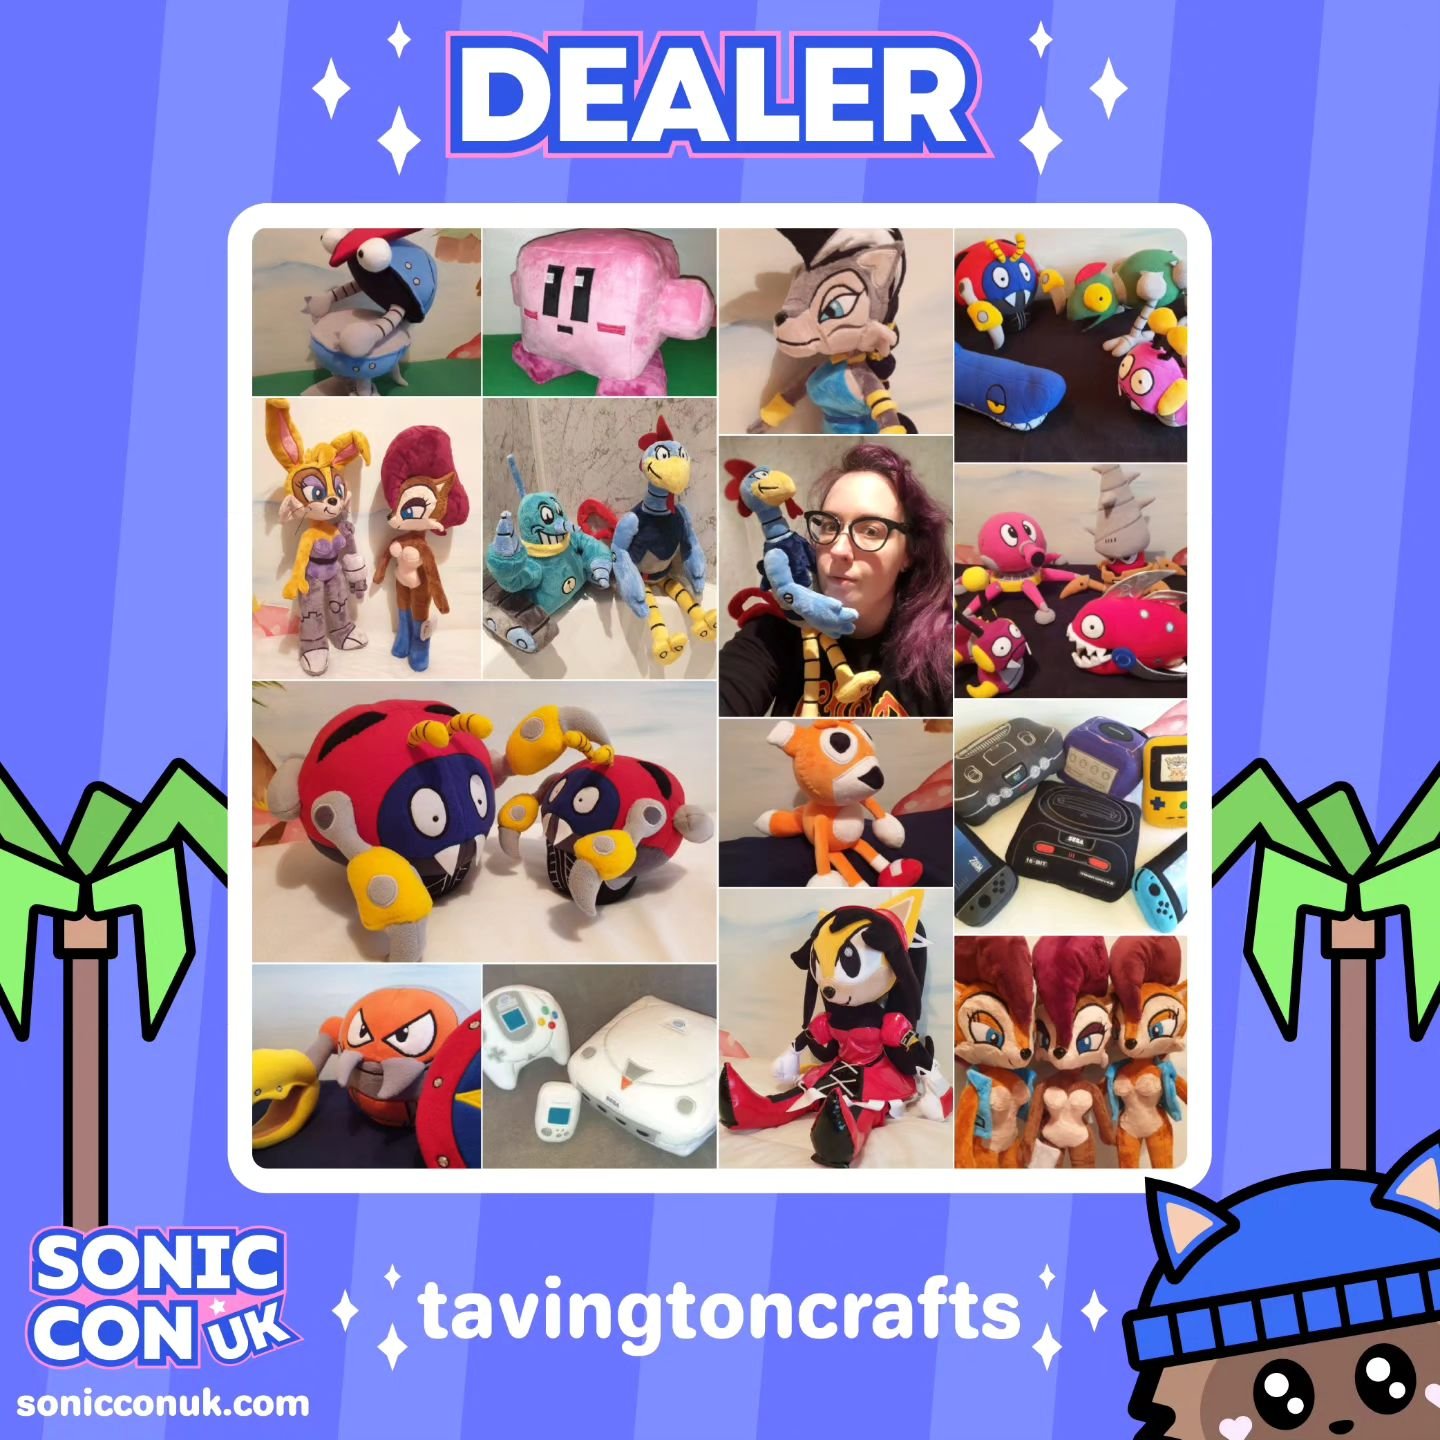 Dealer announcement! 💙🎉 We're excited to welcome tavingtoncrafts to Sonic Con UK! 💙🎉 They will be selling a variety of custom plushies, keychains and more! 

#sonicthehedgehog #sonic #sonicfan #sonicfanart #sonicconvention